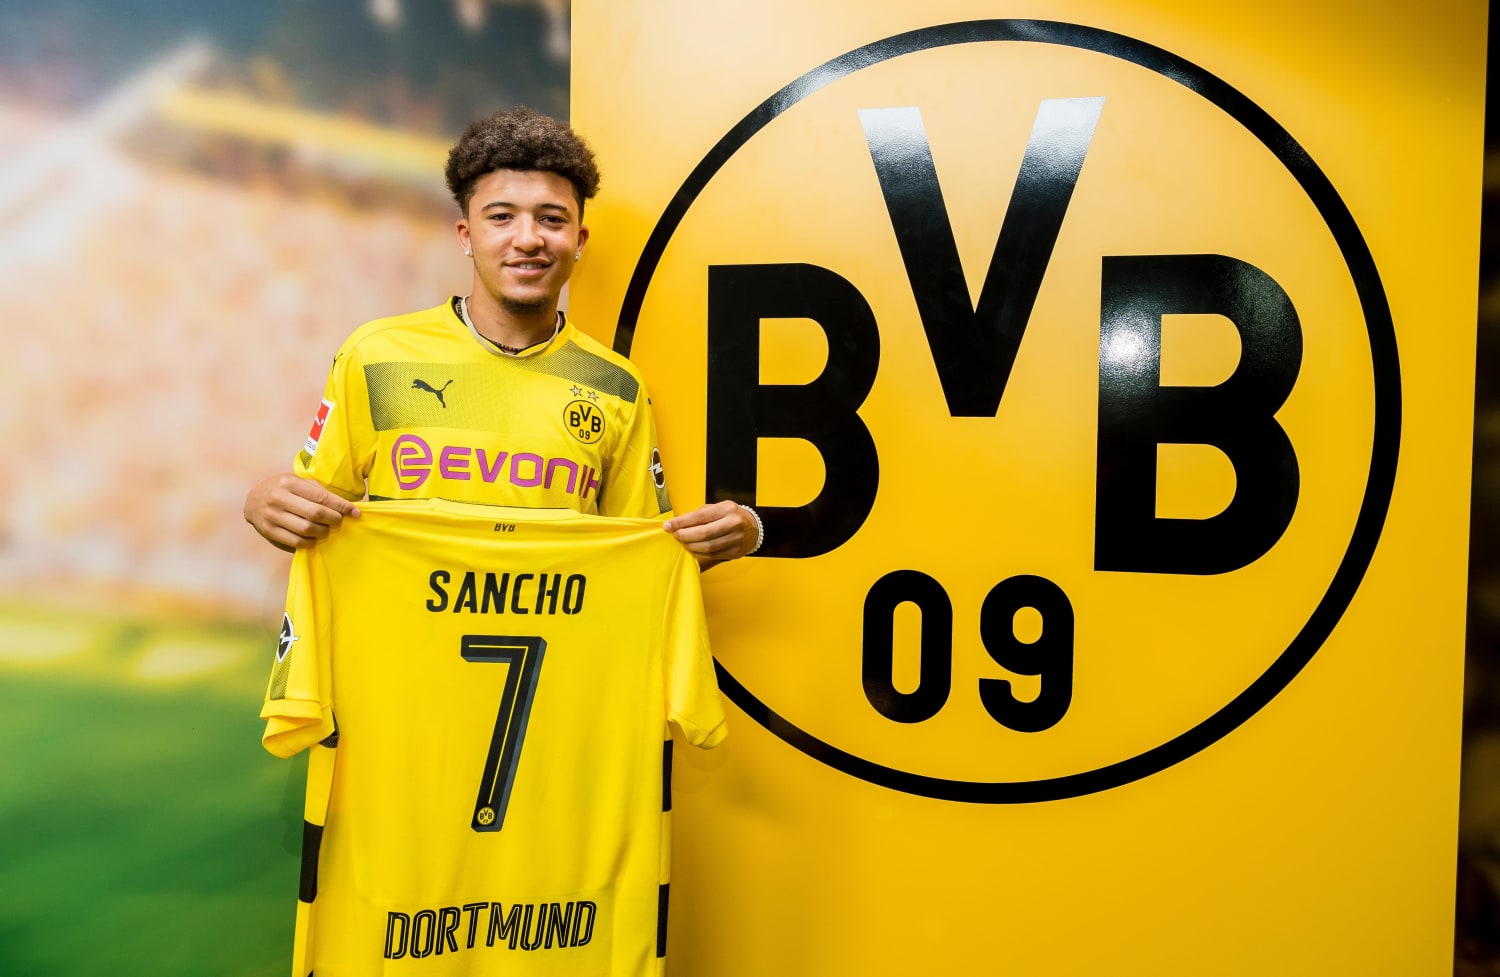 sancho jersey number